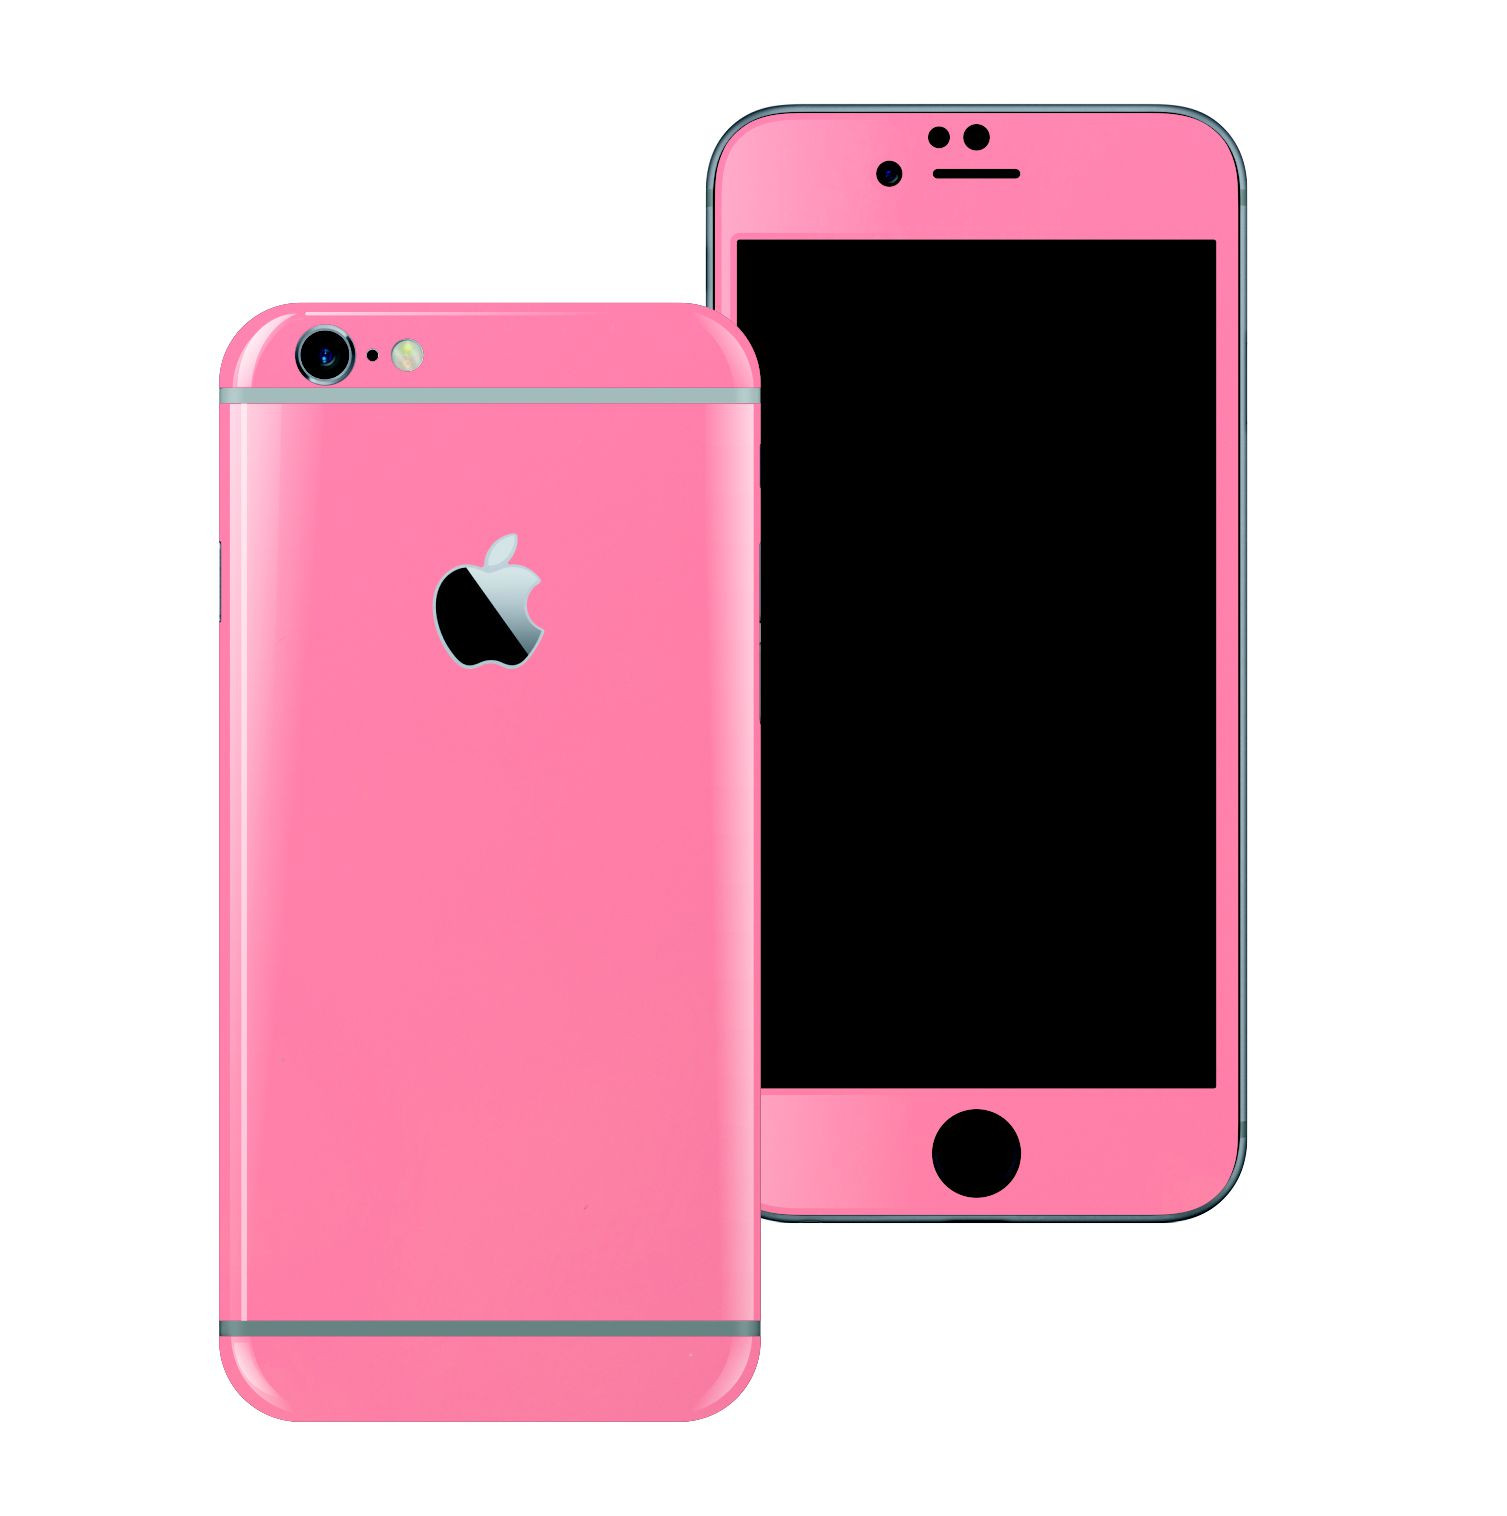 iPhone 5se hot pink